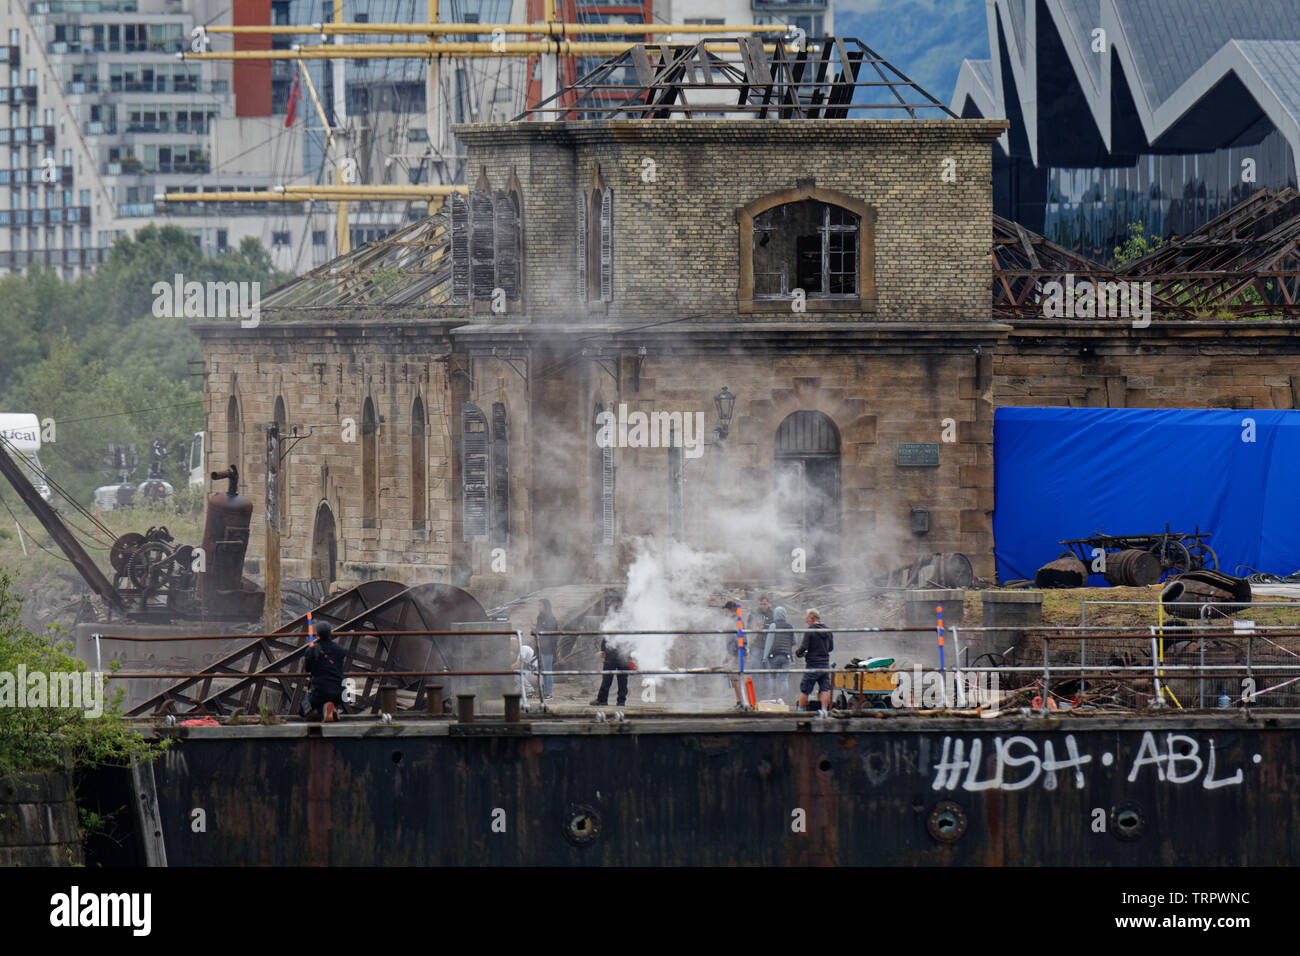 Glasgow, Scotland, UK 11th June, 2019. Smoke on the water as Steven Spielberg first world war movie “1917” began filming in the Govan graving docks on the banks of the river Clyde in the city today with pyrotechnics being tested. Credit: Gerard Ferry/ Alamy Live News Stock Photo